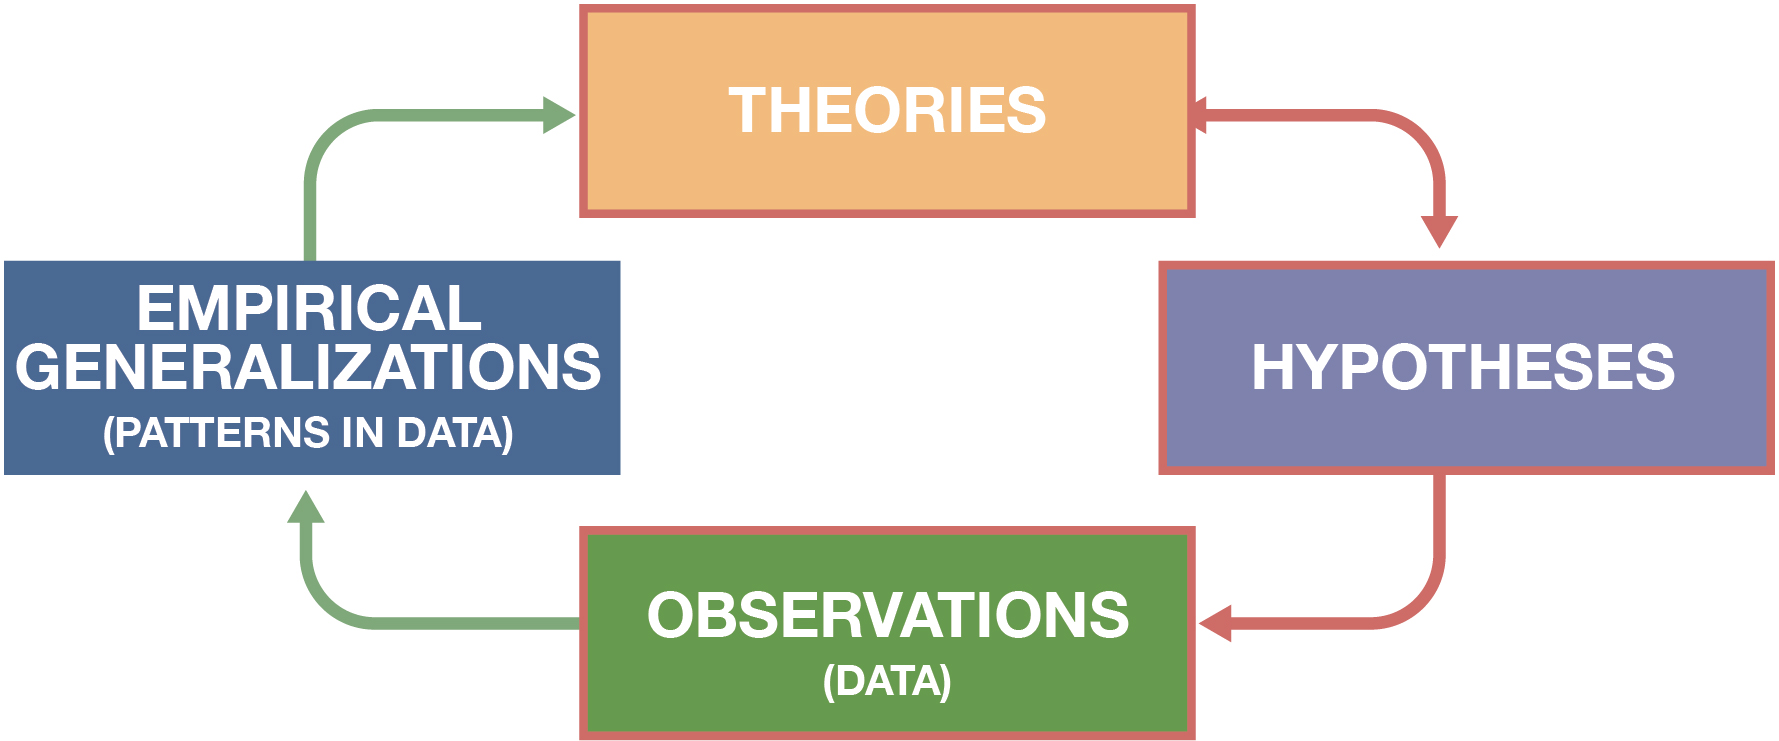 Cycle highlighting the deductive research stages of the Wheel of Science: (1) theory to (2) hypotheses to (3) observations.